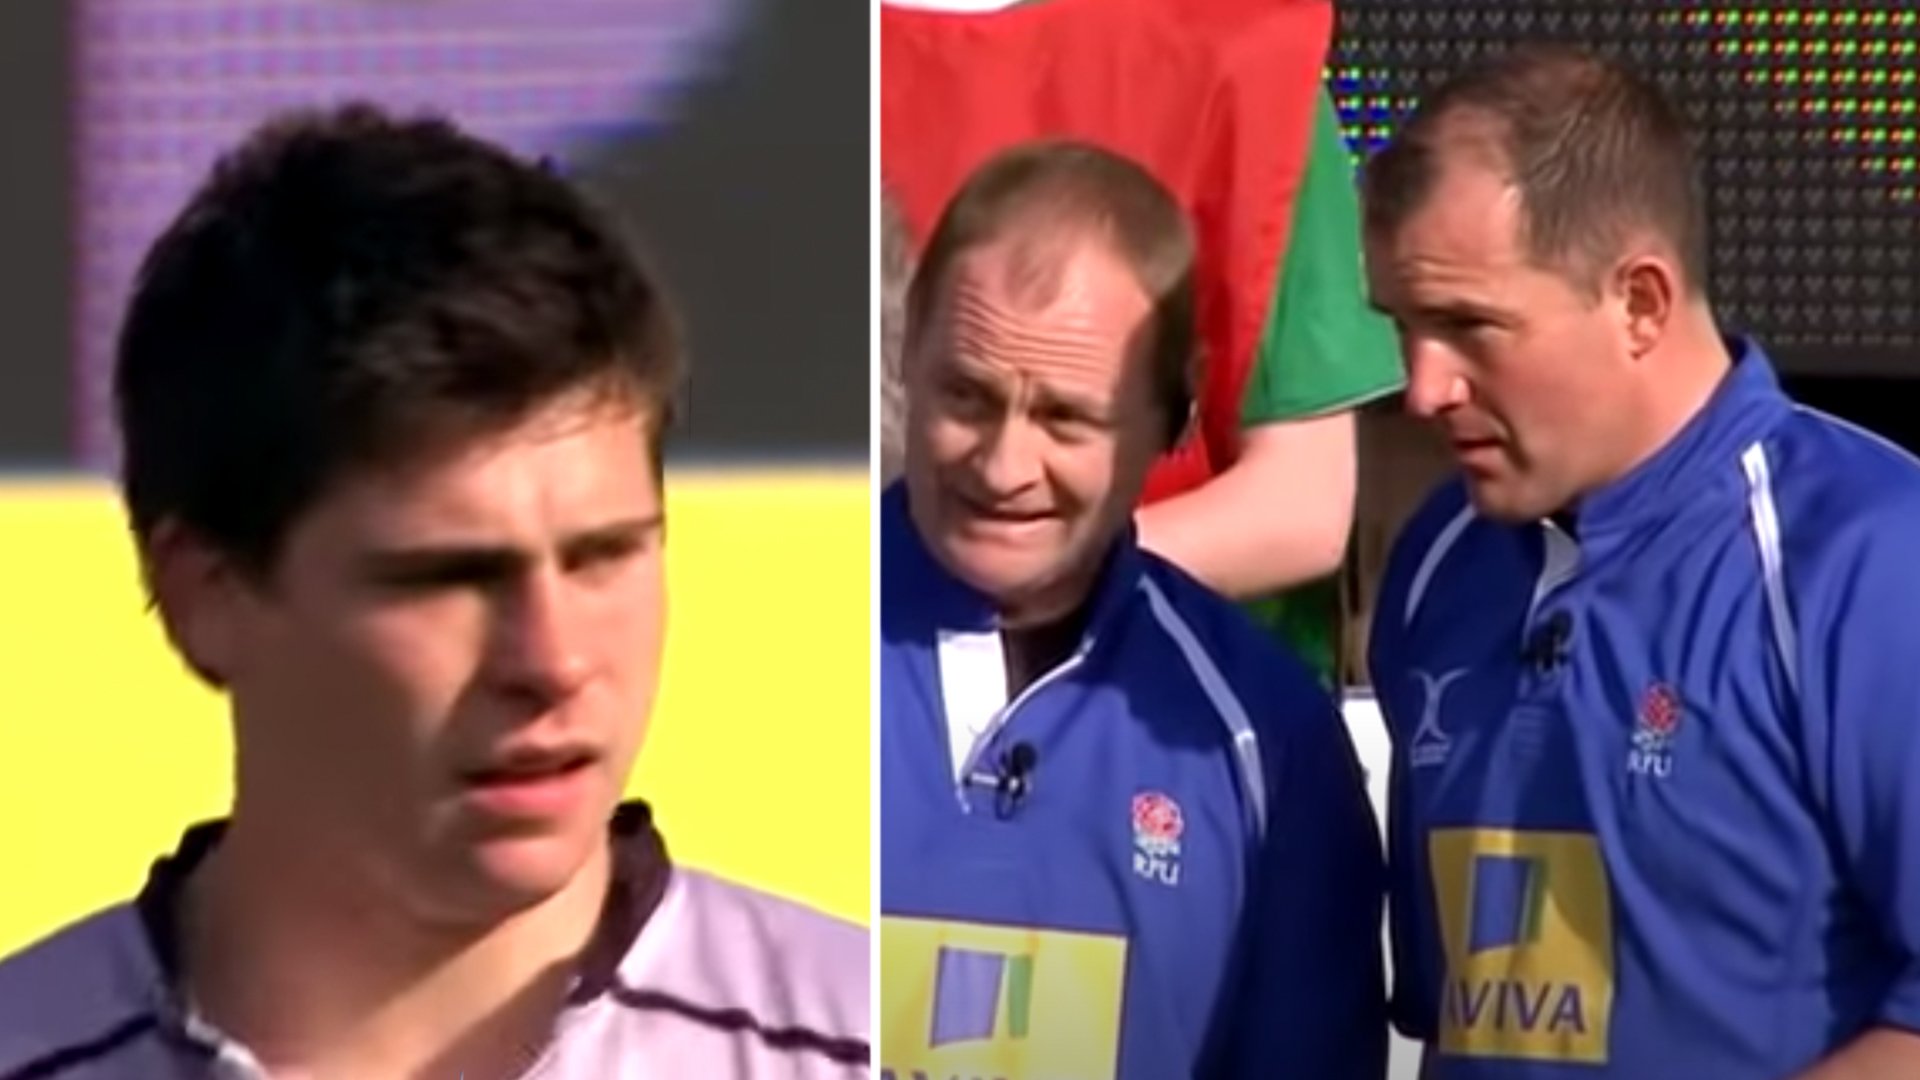 The shocking Ben Youngs incident nearly everyone has forgotten